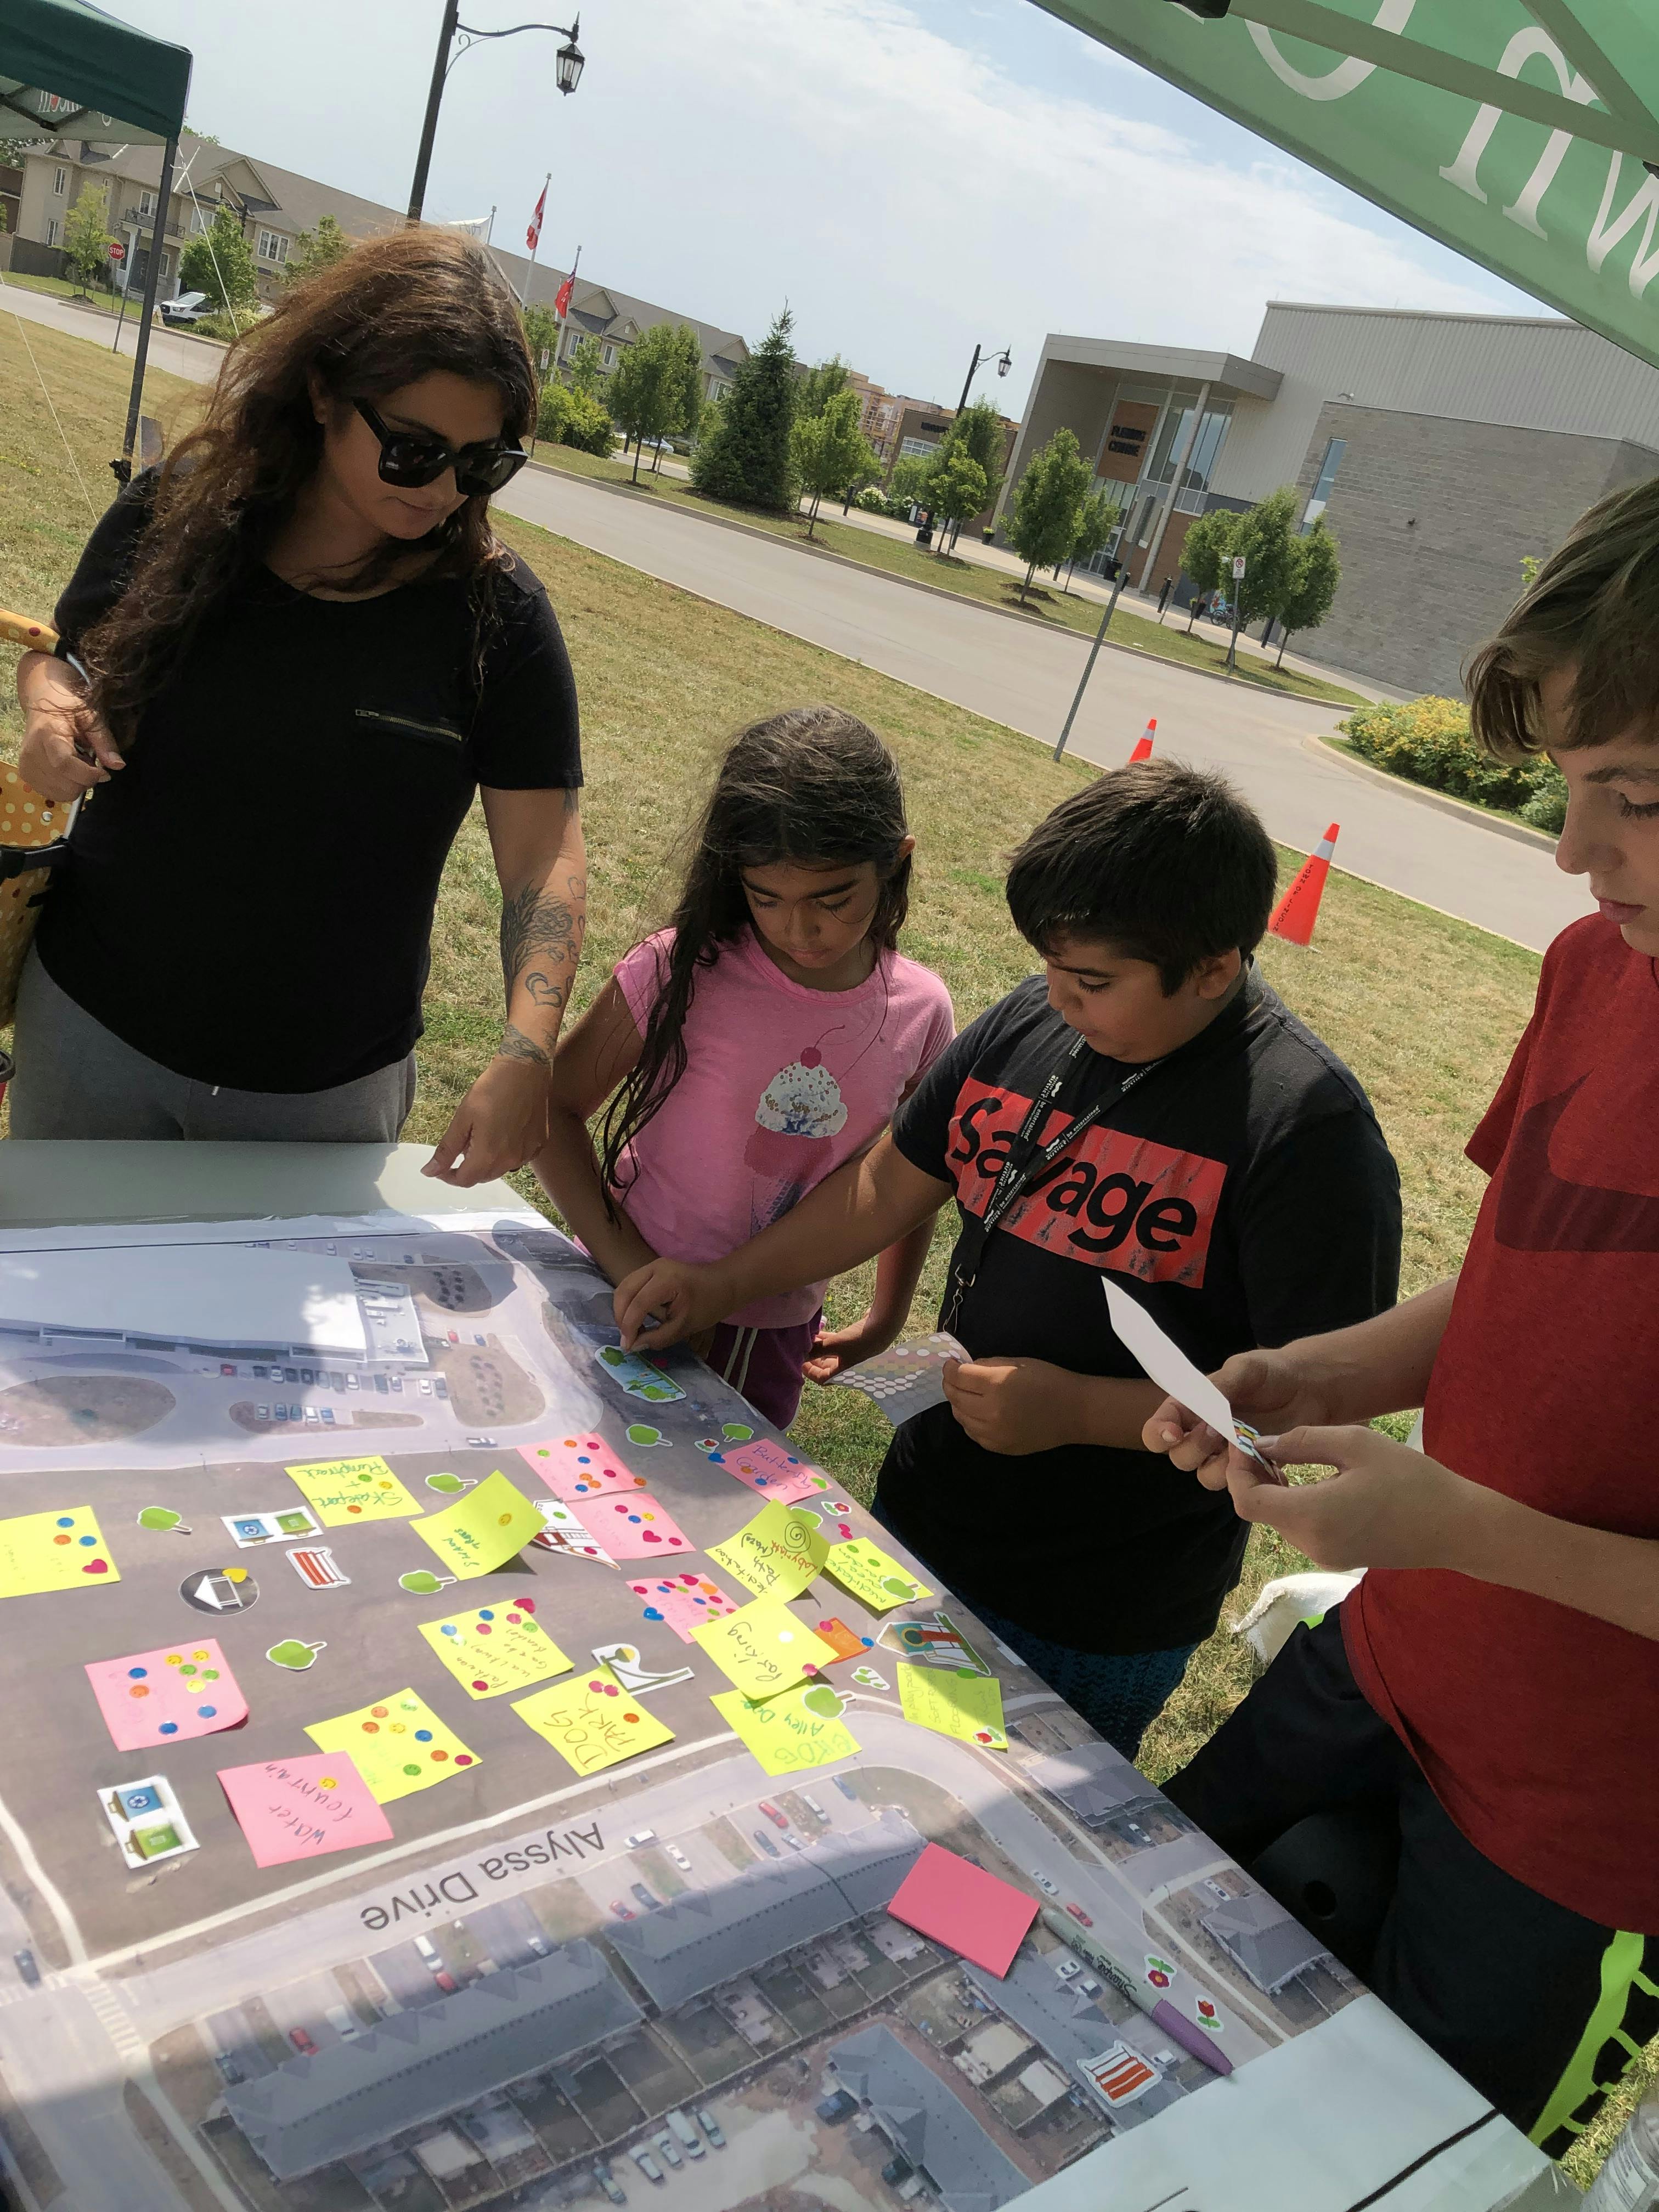 Lincoln residents participate in community consultation activities for Rotary Park